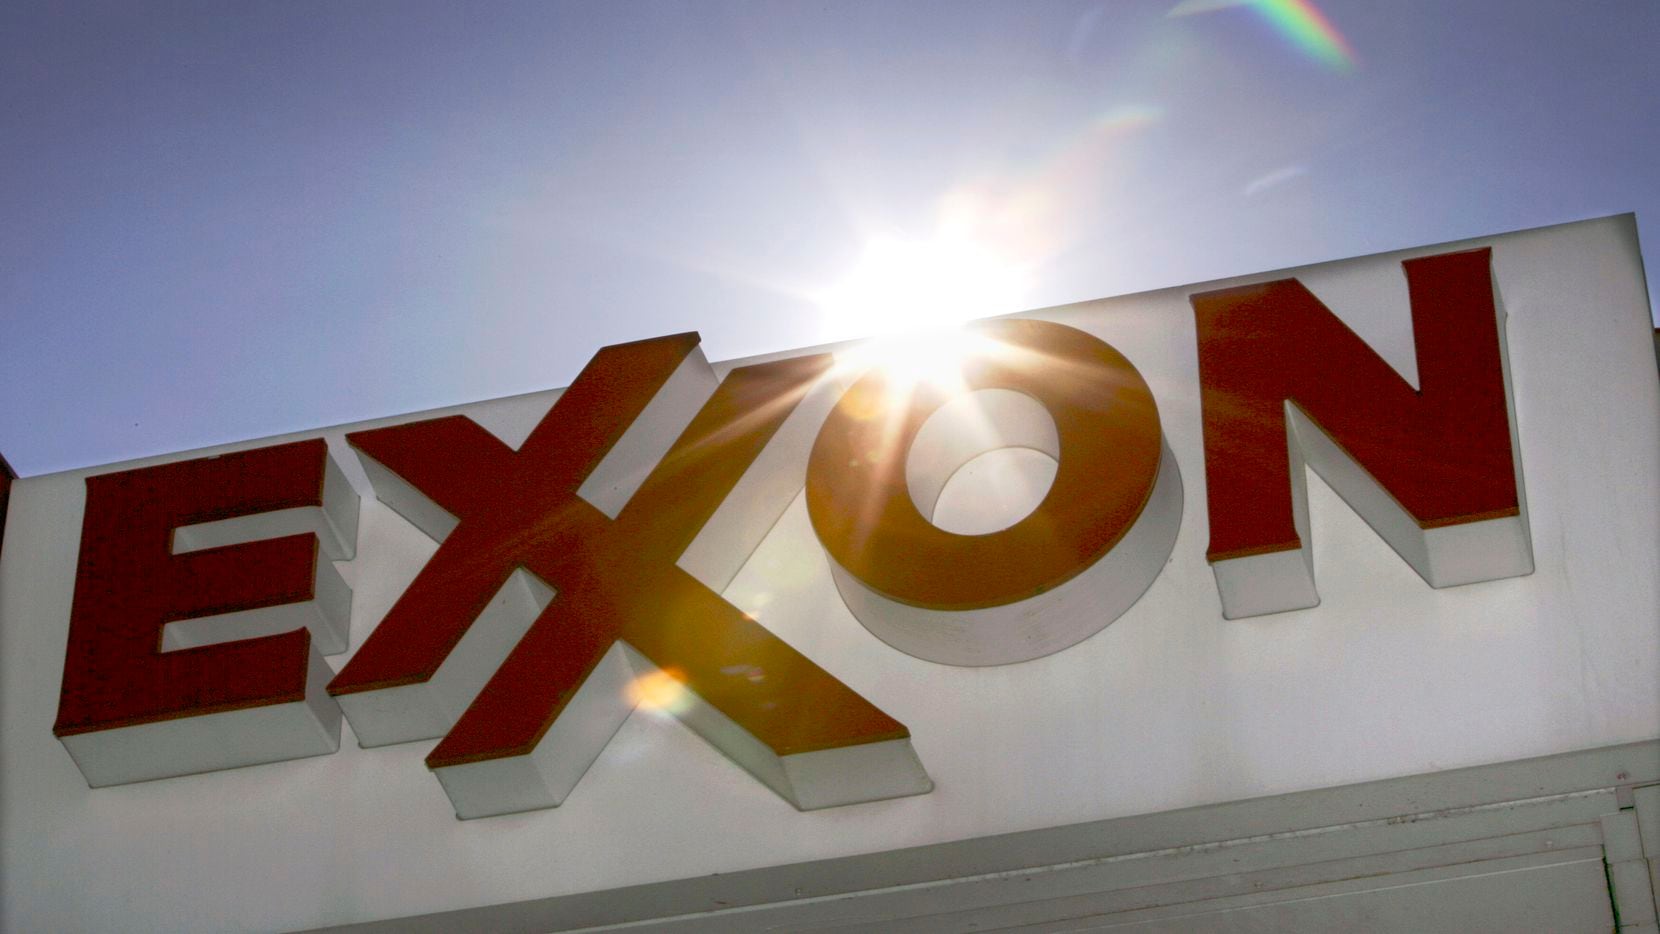 Exxon Mobil is an Irving-based oil and gas major.